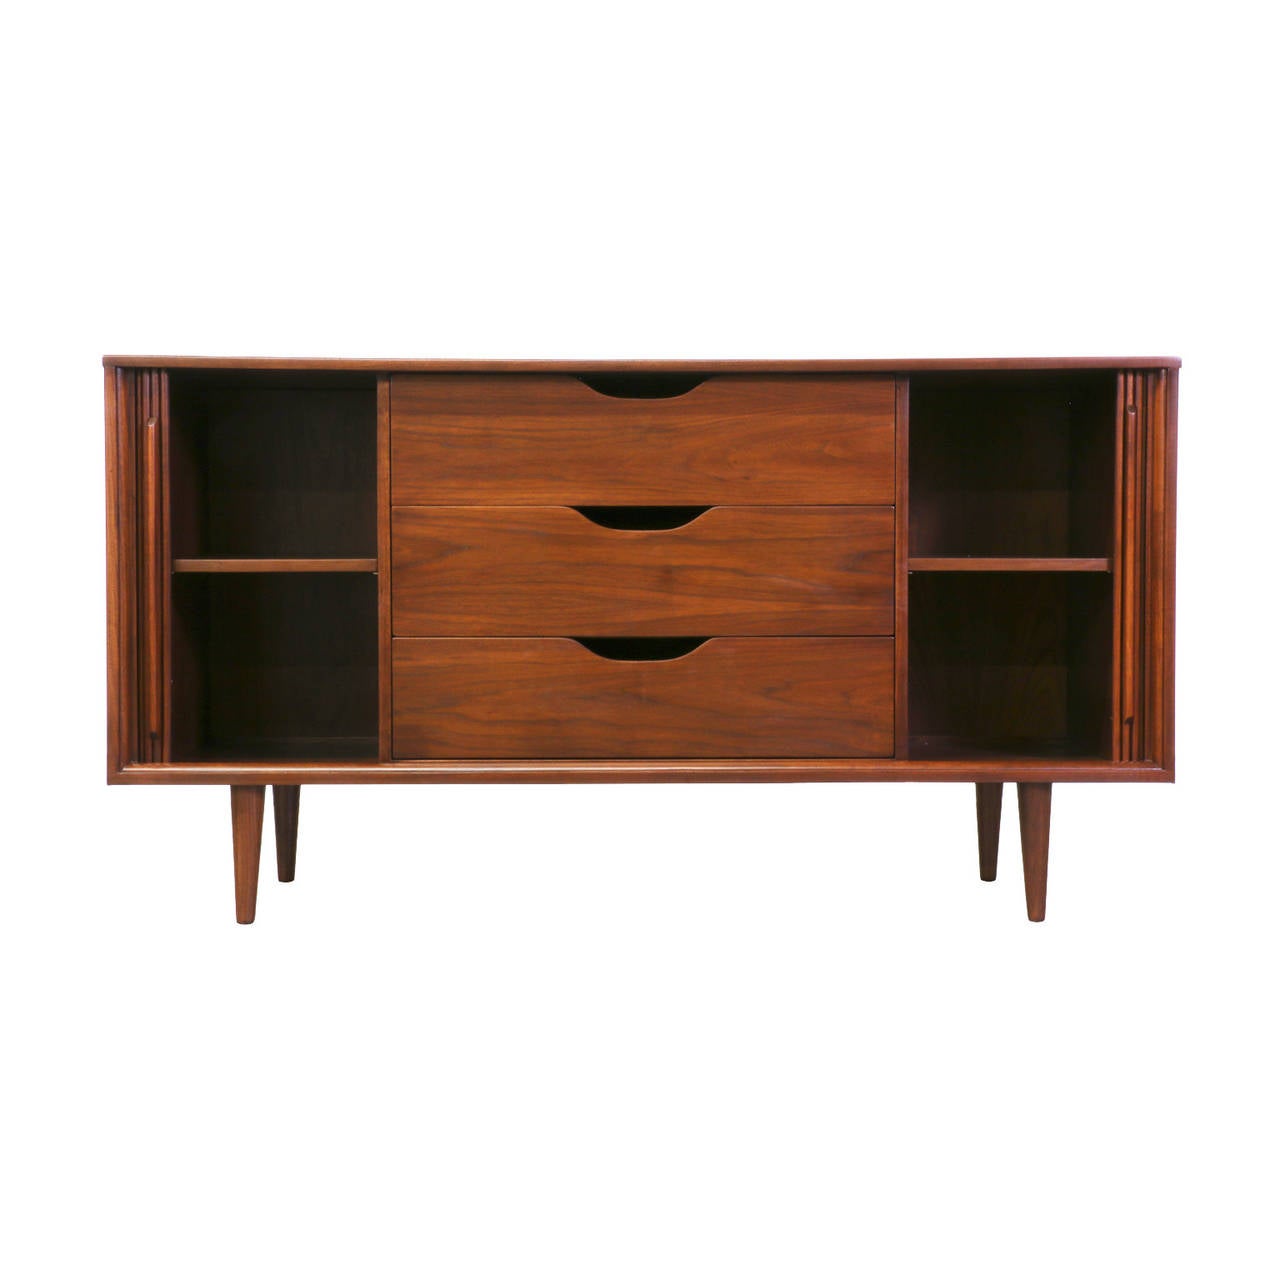 Designer: Unknown
Manufacturer: Unknown
Period/Style: Mid Century Modern
Country: United States
Date: 1950’s

Dimensions: 32″H x 54.75″L x 18″W
Materials: Walnut
Condition: Excellent – Newly Refinished
Number of Items: 1
ID Number: